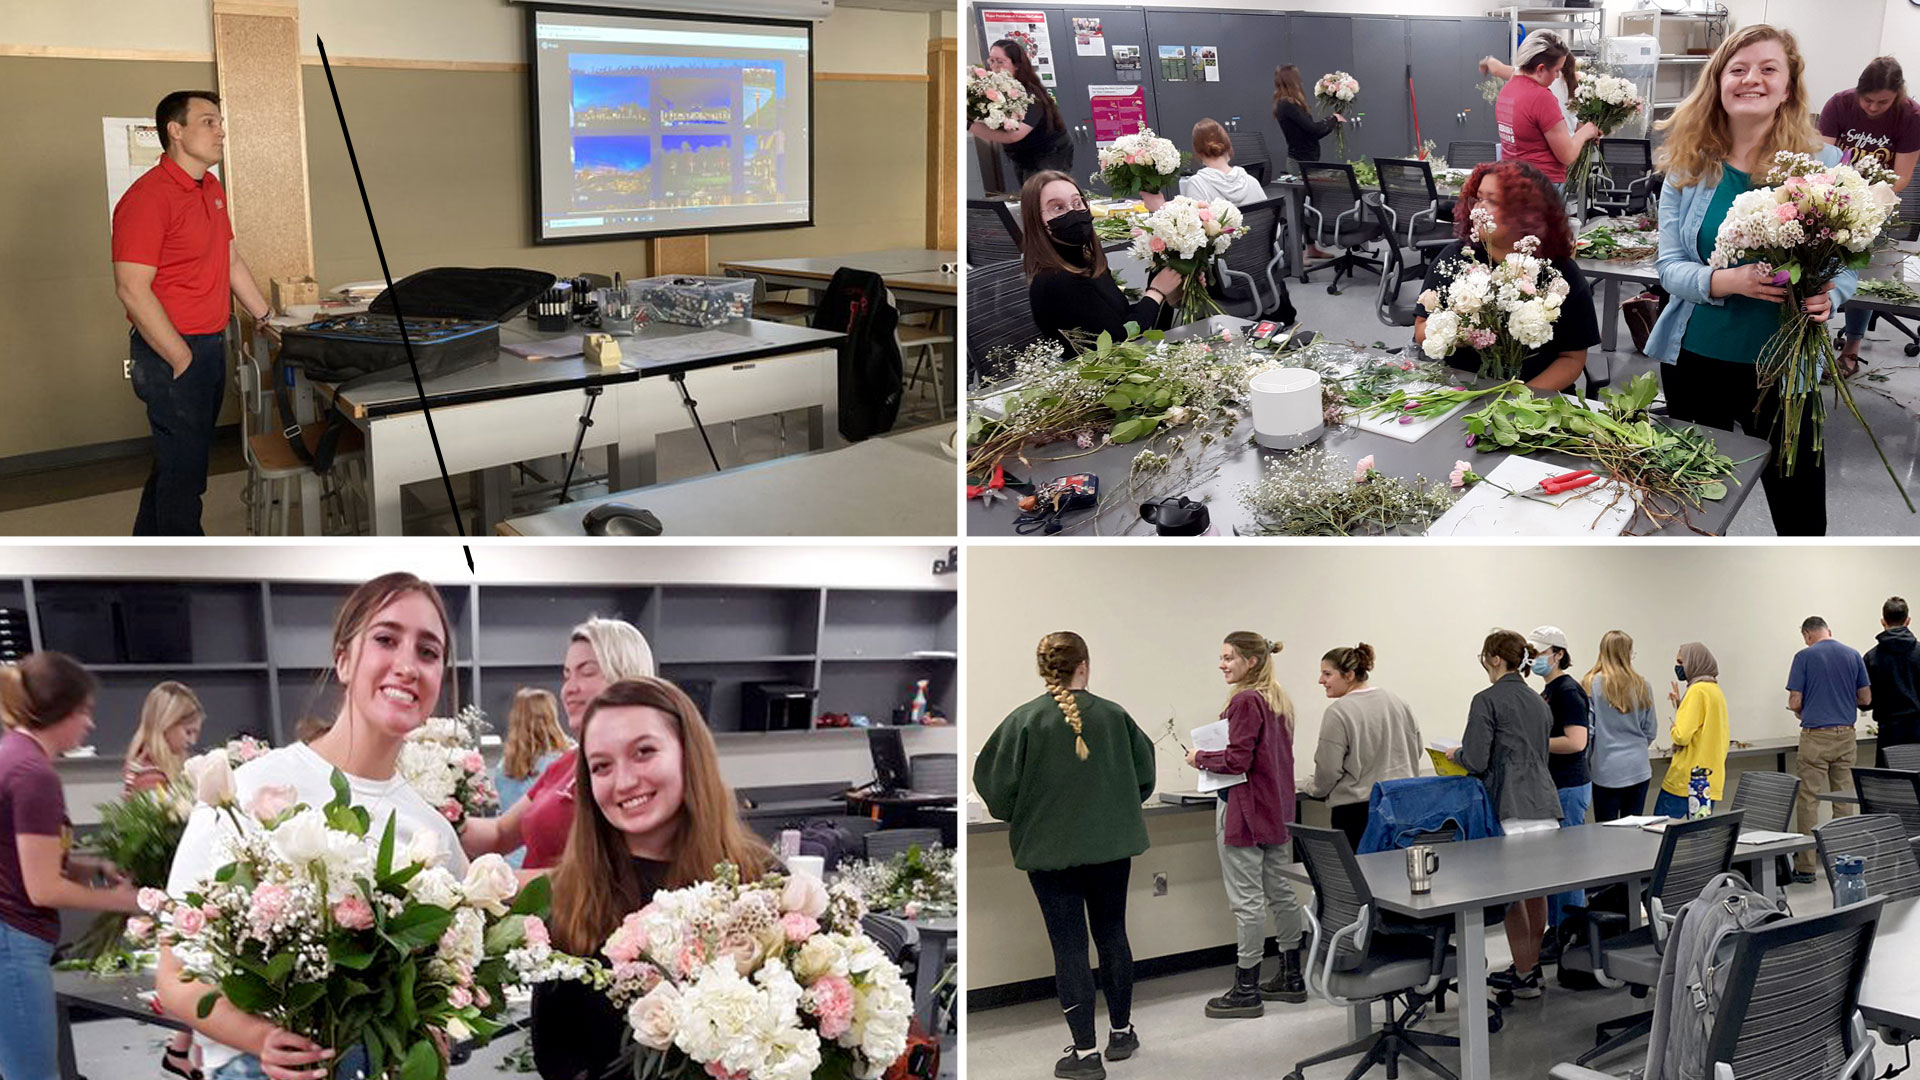 On campus and inside horticulture classes last week.